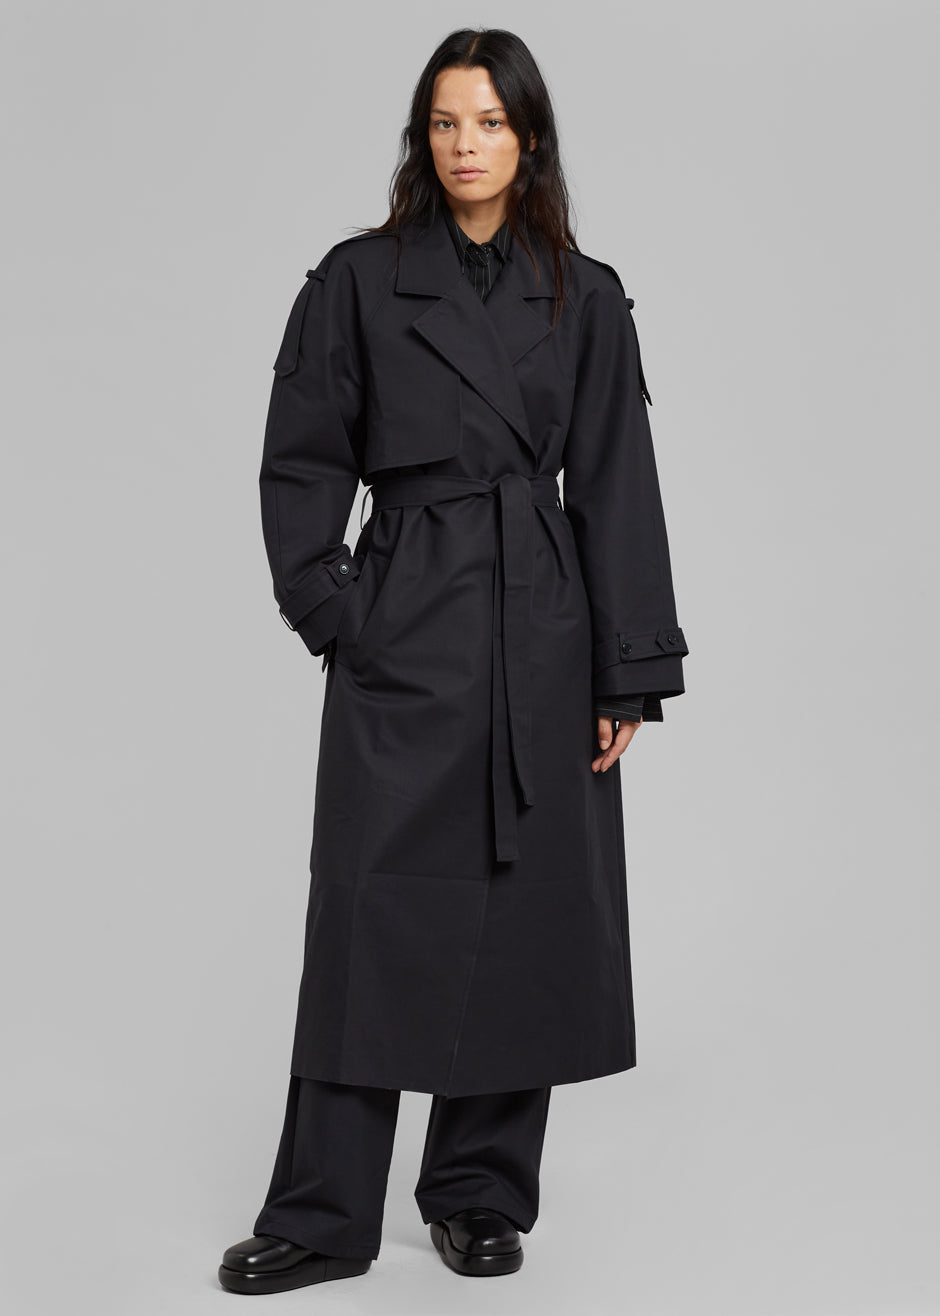 Suzanne Trench Coat - Black